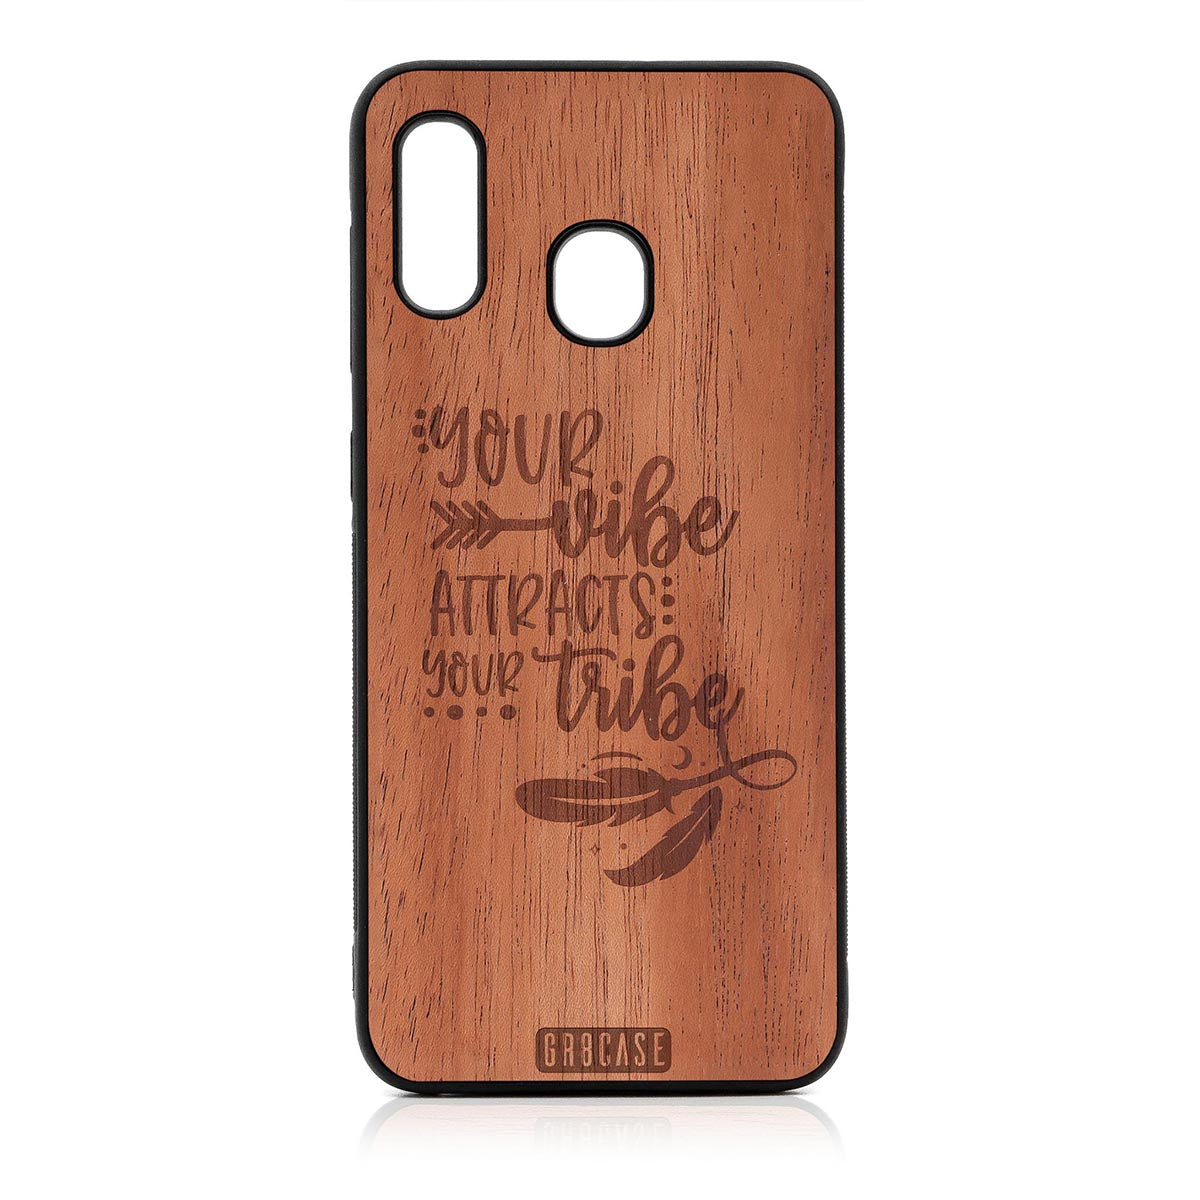 Your Vibe Attracts Your Tribe Design Wood Case For Samsung Galaxy A20